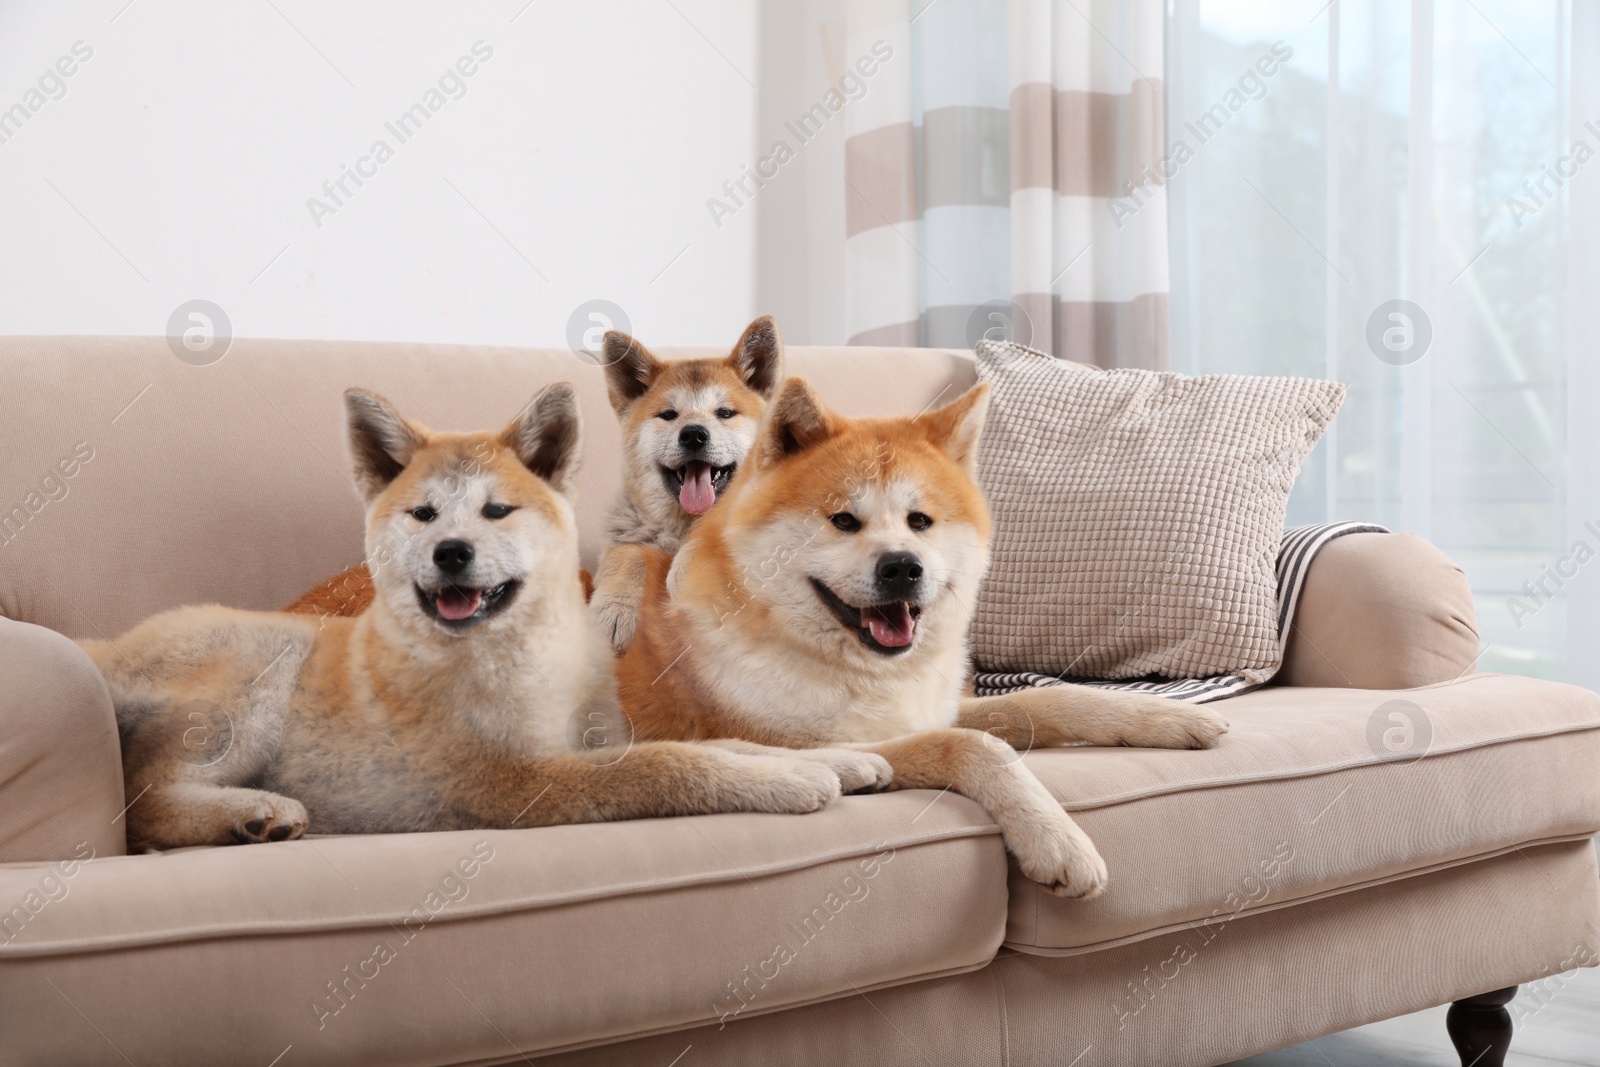 Photo of Adorable Akita Inu dog and puppies on sofa in living room